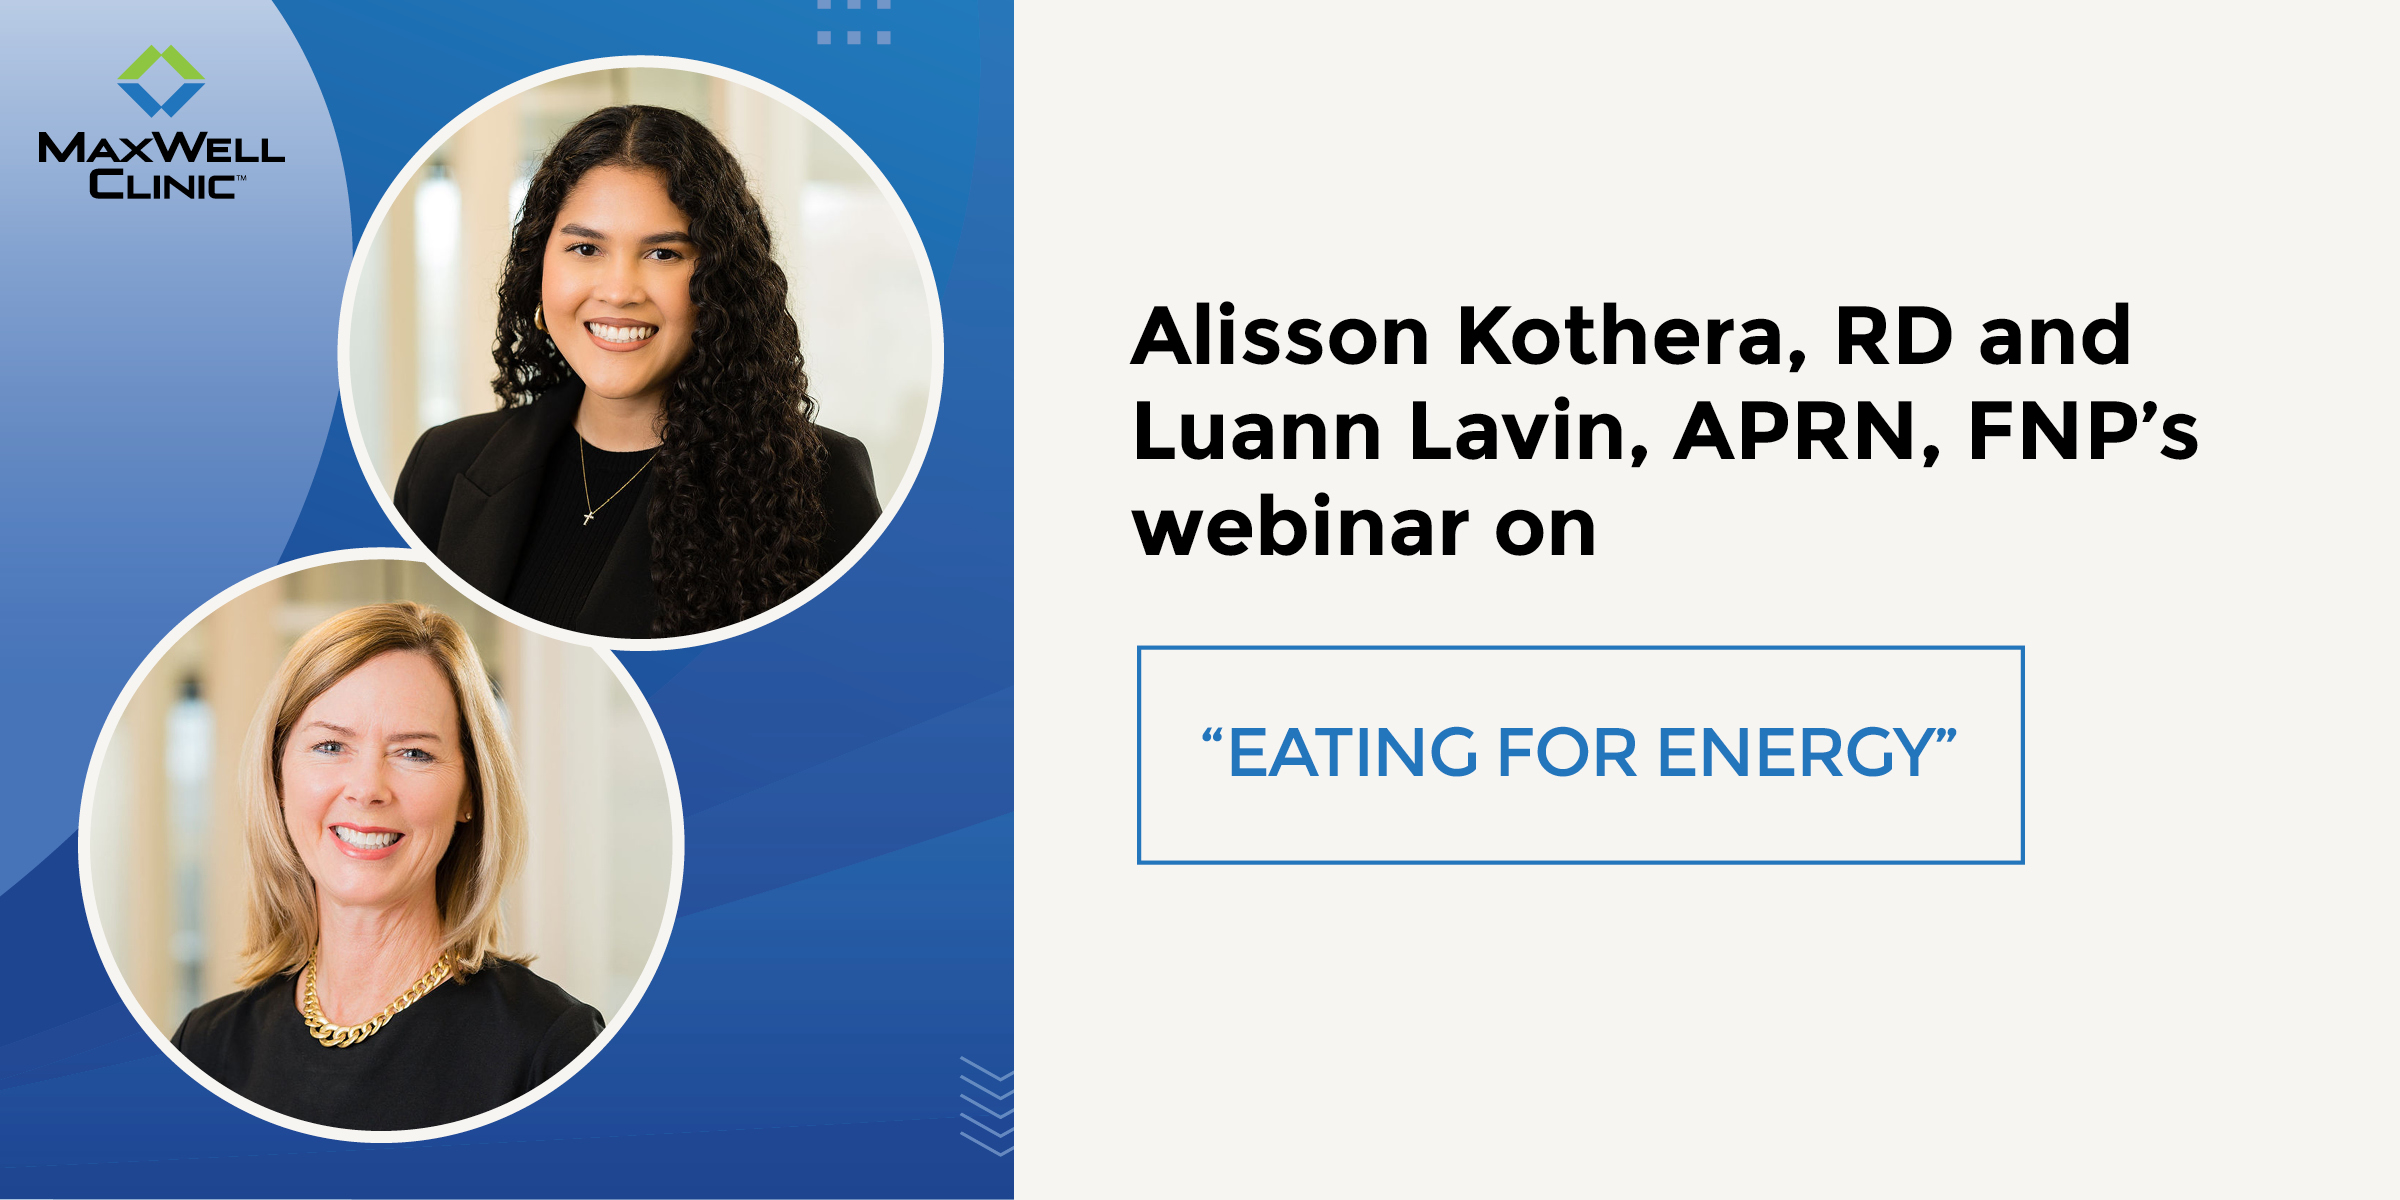 Eating for Energy with Alisson Kothera, RD, and Luann Lavin, APRN, FNP-C